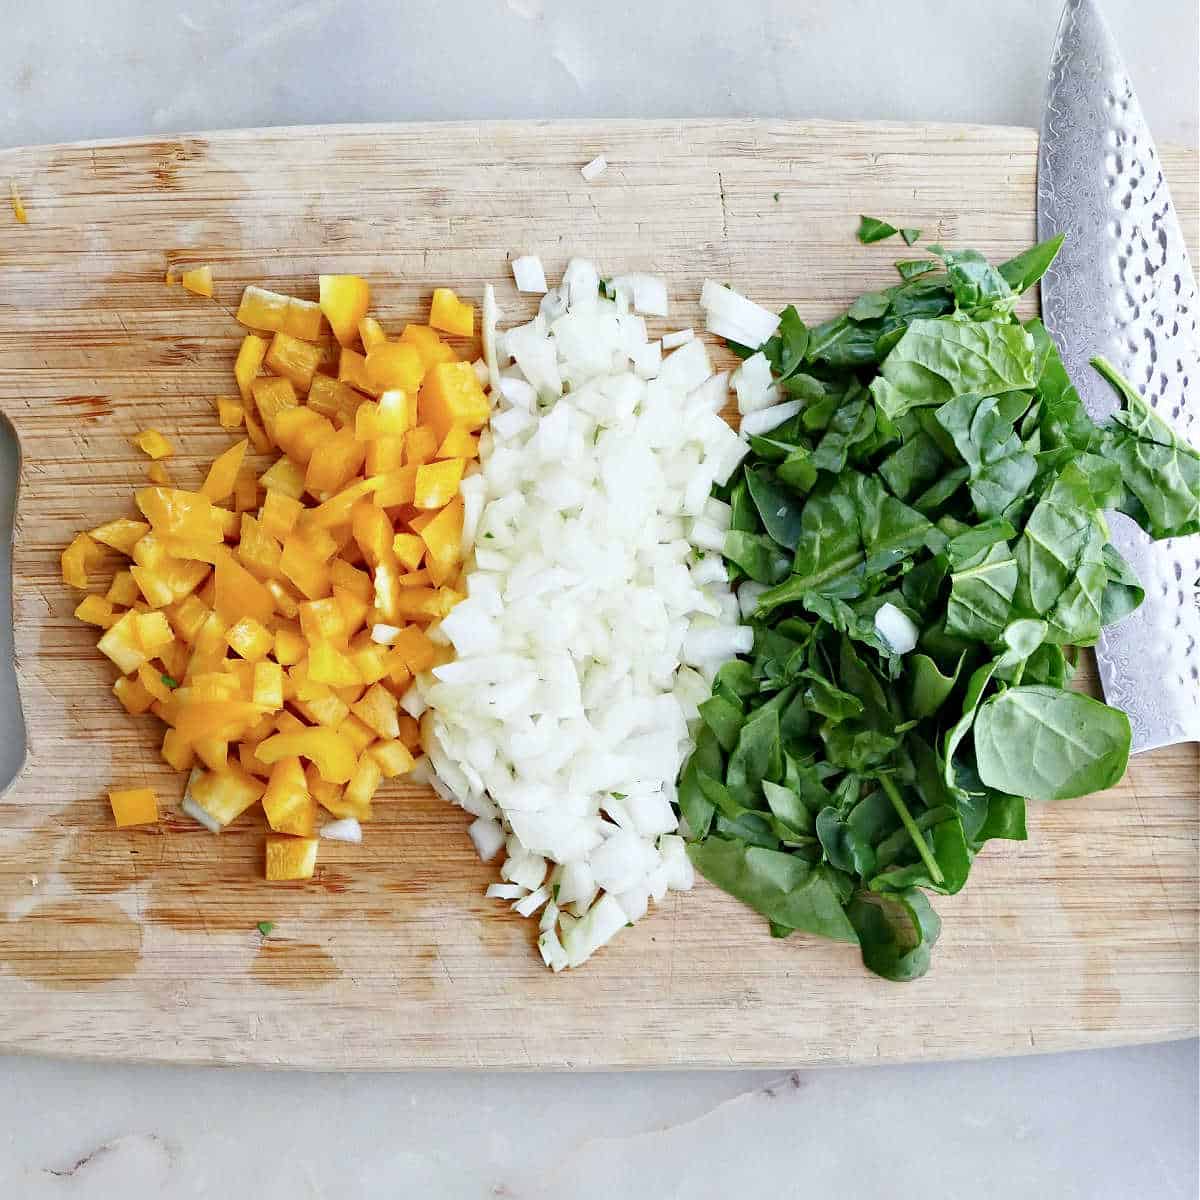 chopped peppers, onion, and spinach on a cutting board with a knife